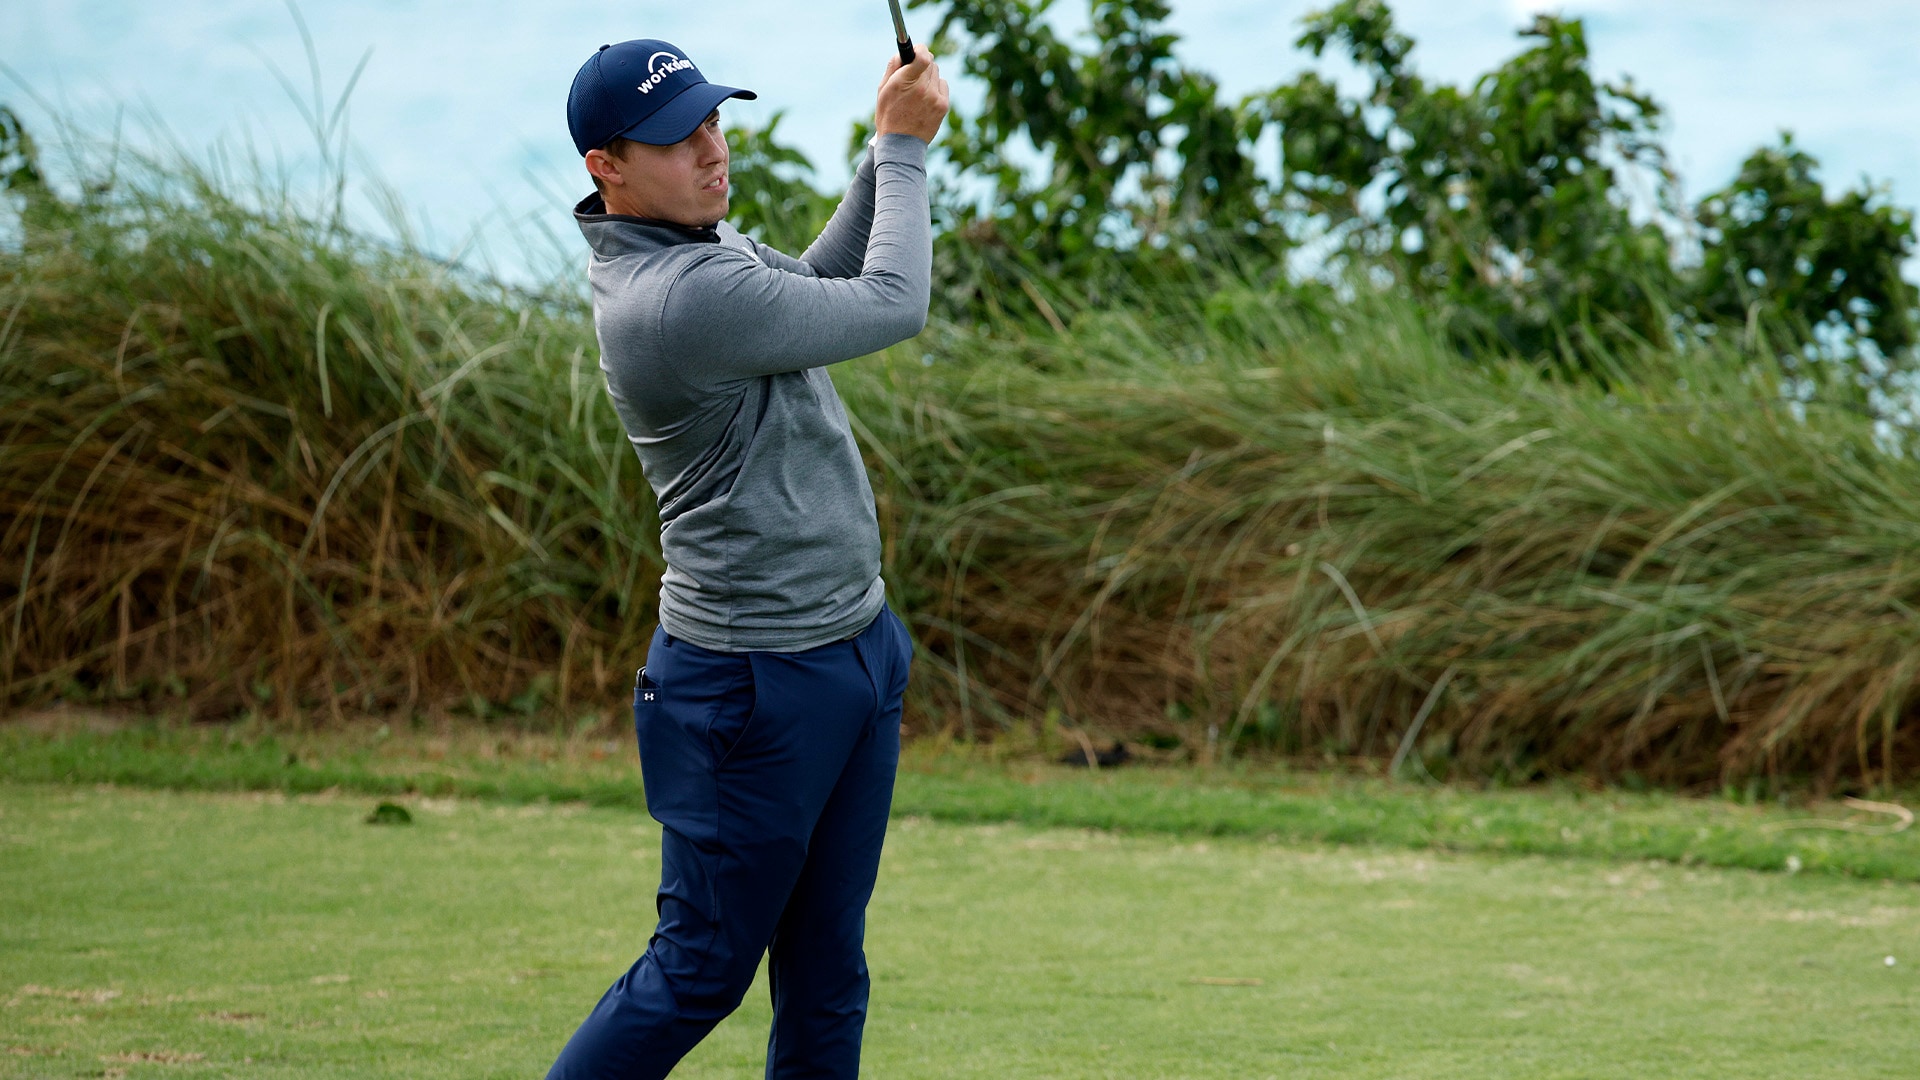 Matthew Fitzpatrick, Russell Knox agree: Strongest wind they ever played in 4